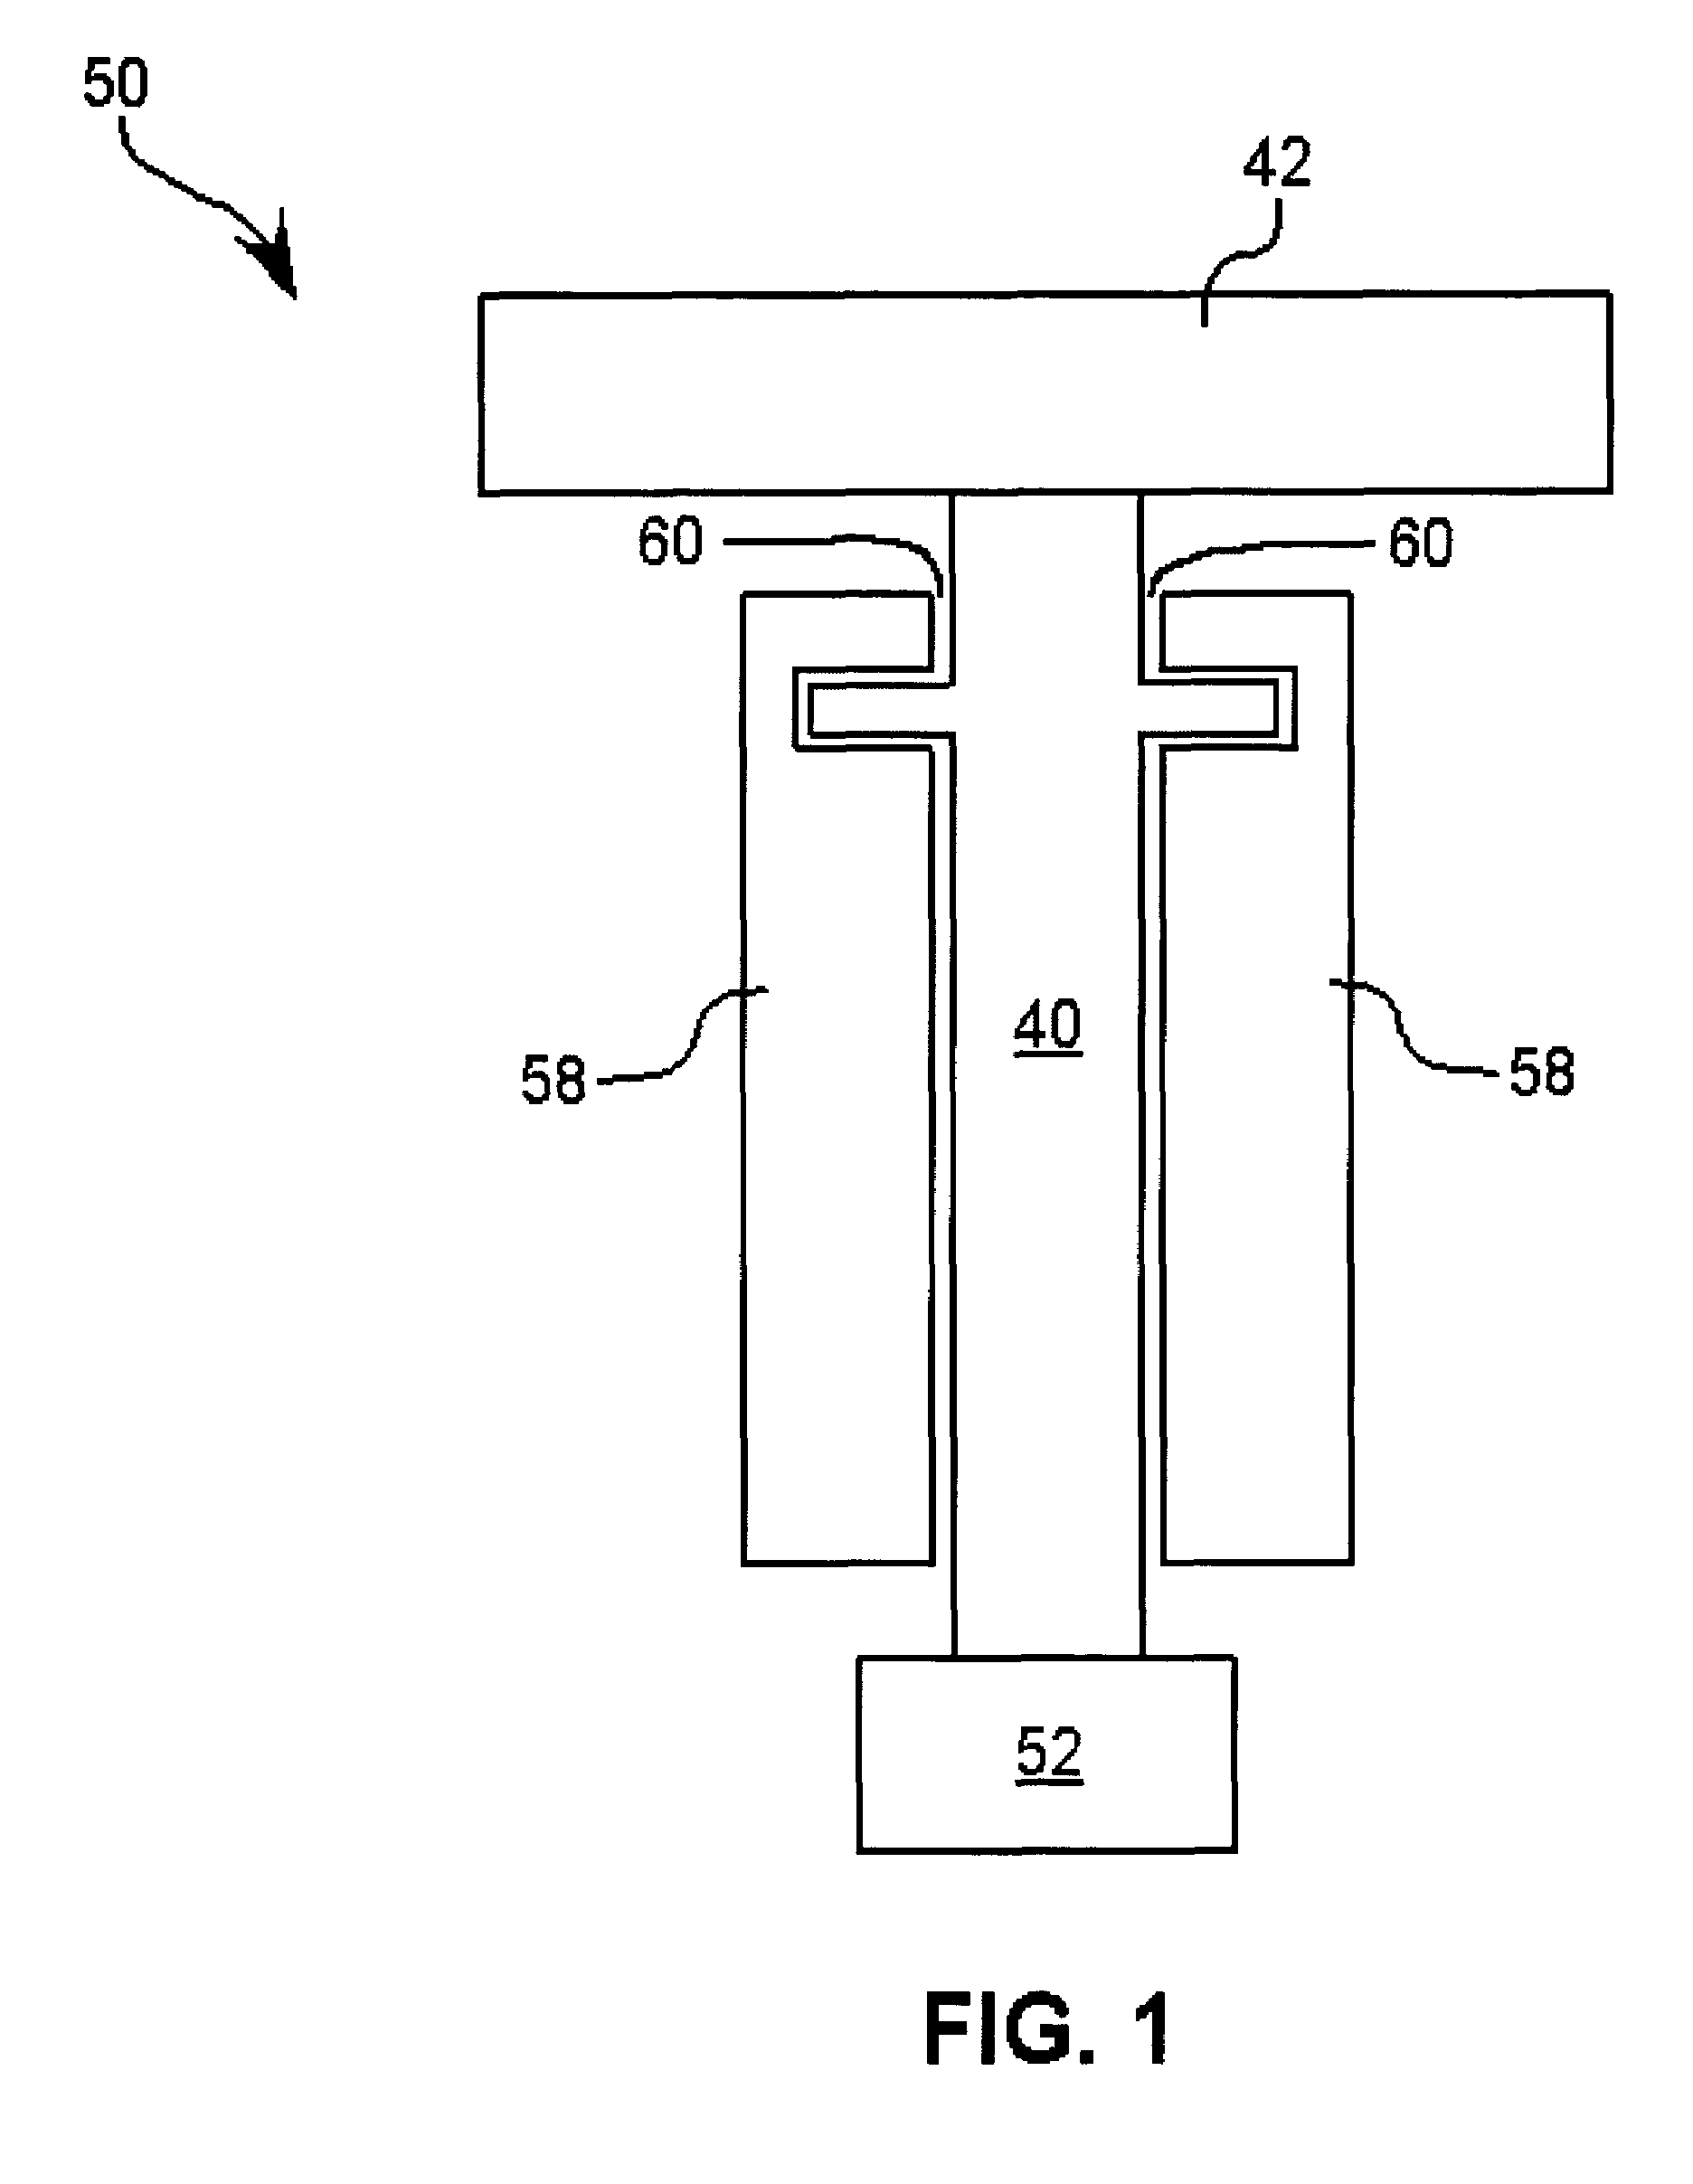 Disk drive system with hydrodynamic bearing lubricant having charge-control additive comprising dioctyldiphenylamine and/or oligomer thereof